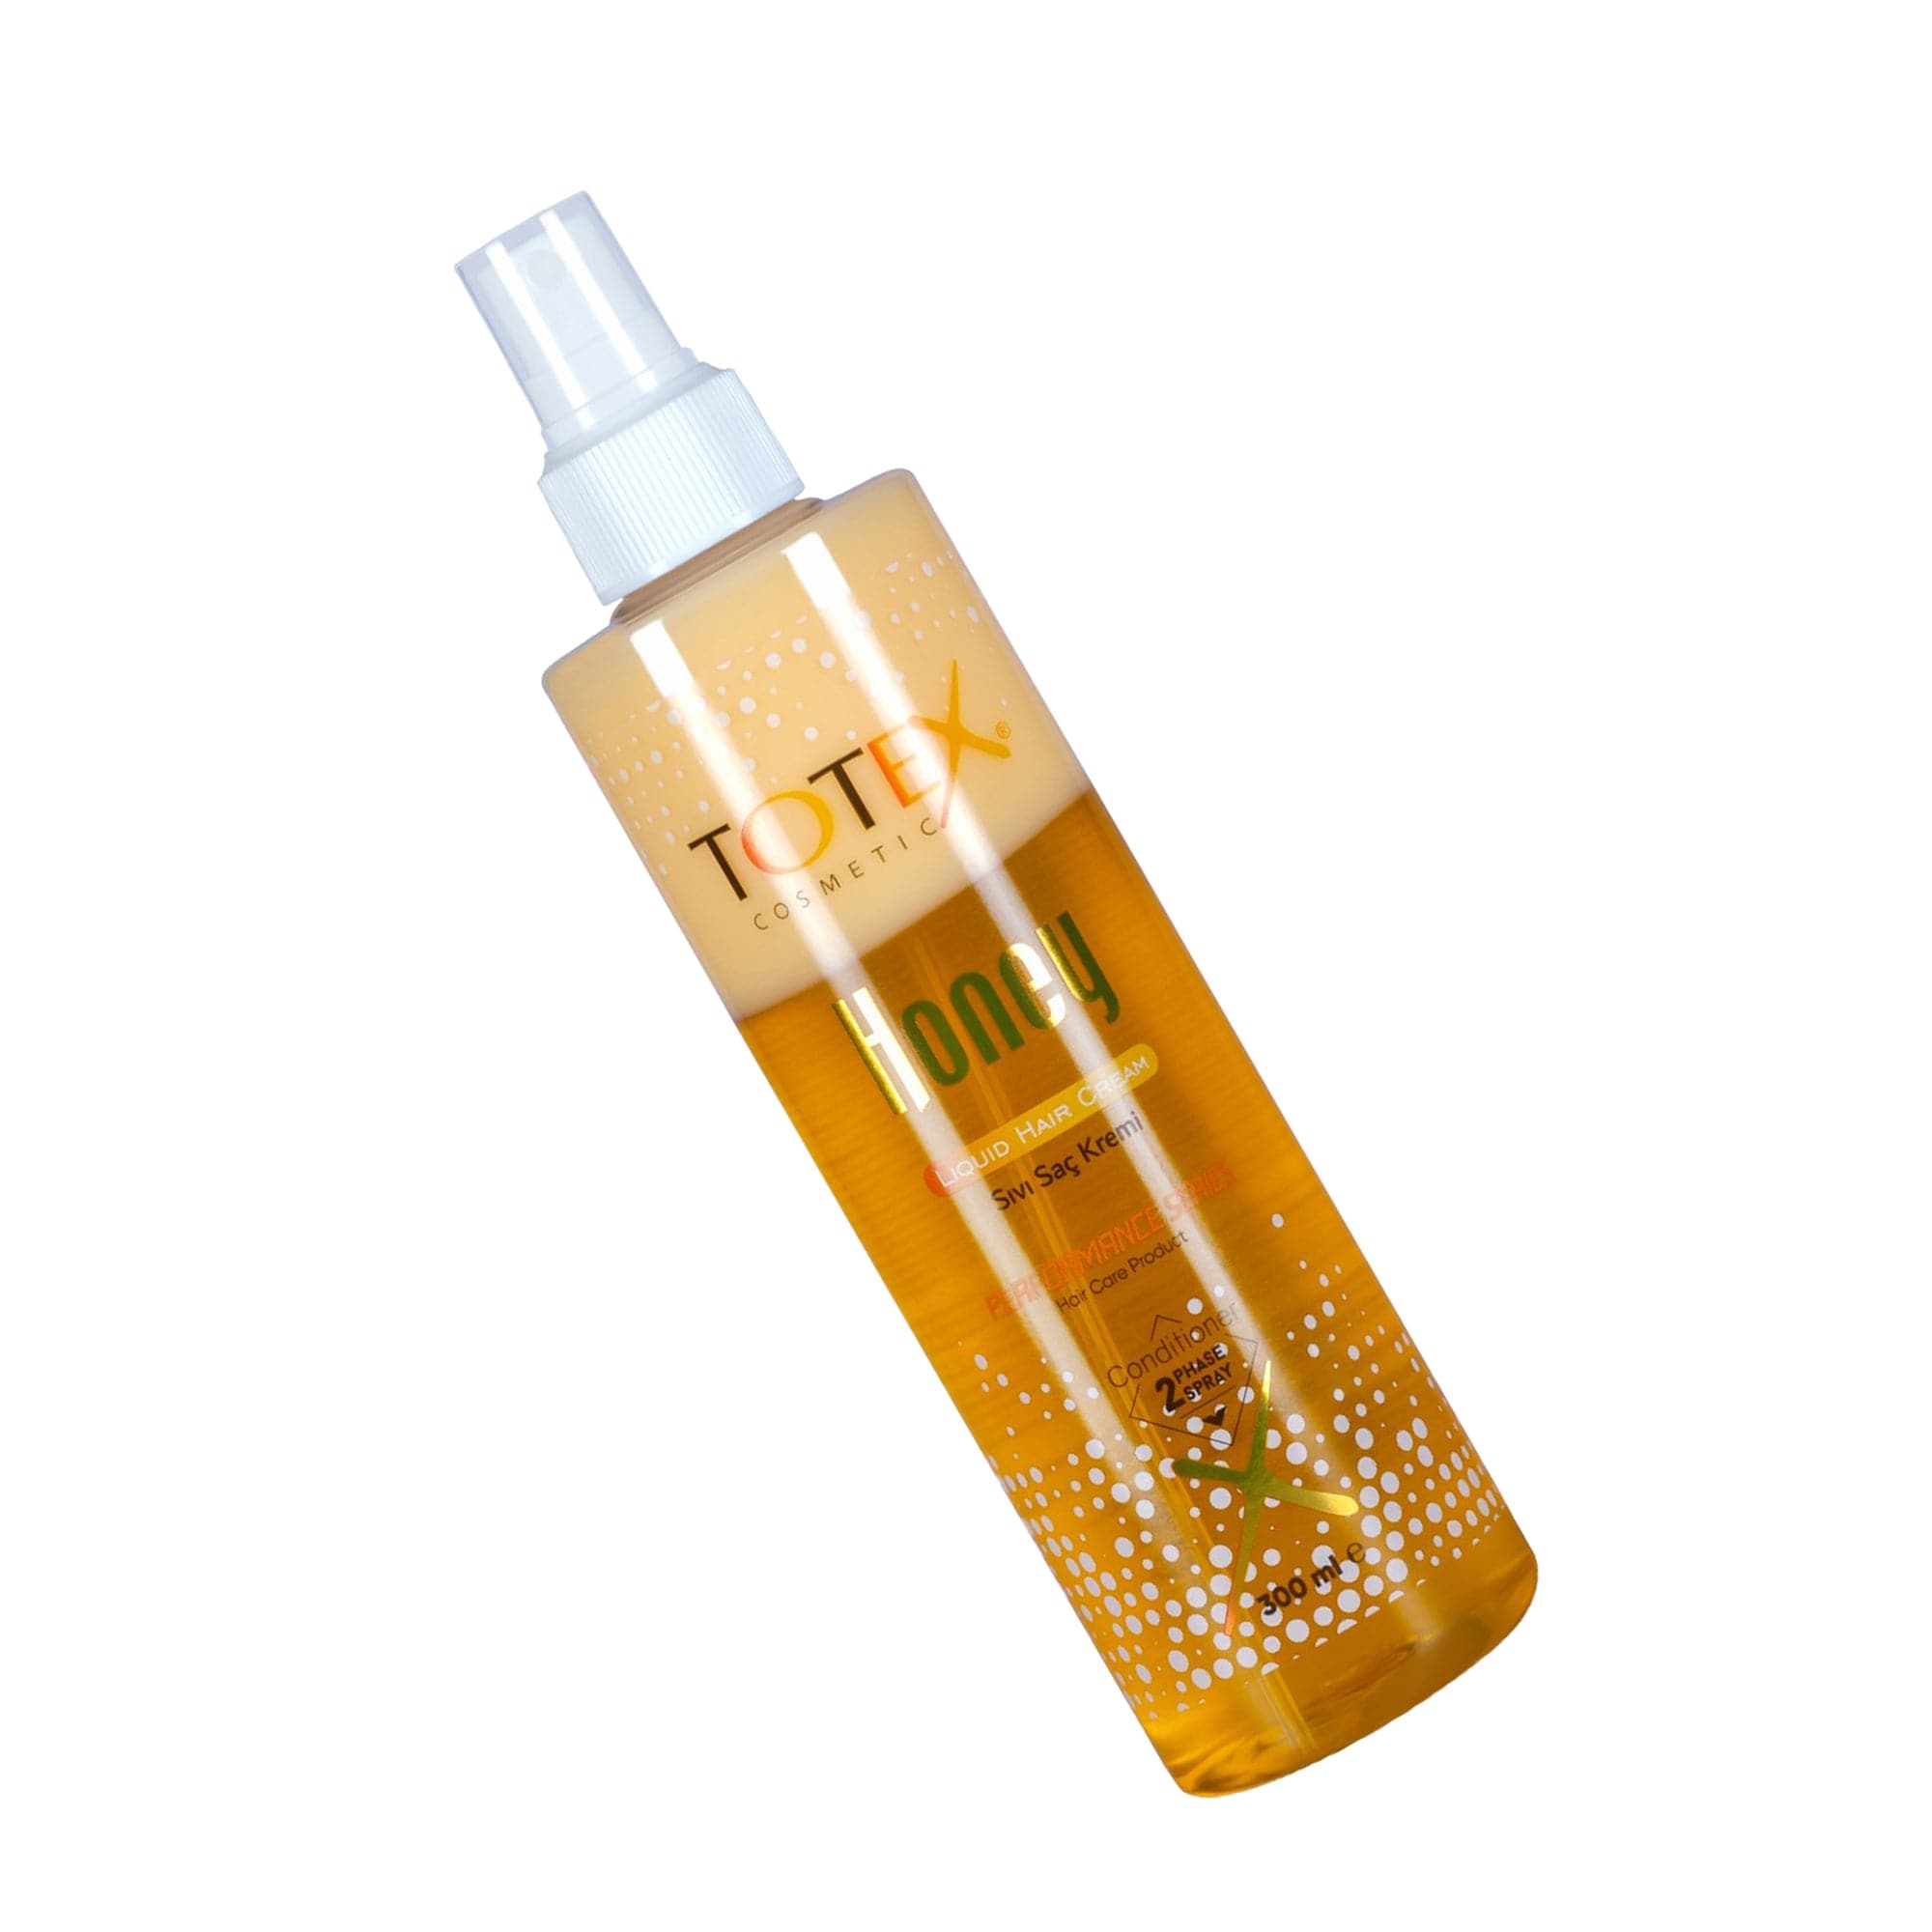 Totex - Two Phase Conditioner Honey 300ml